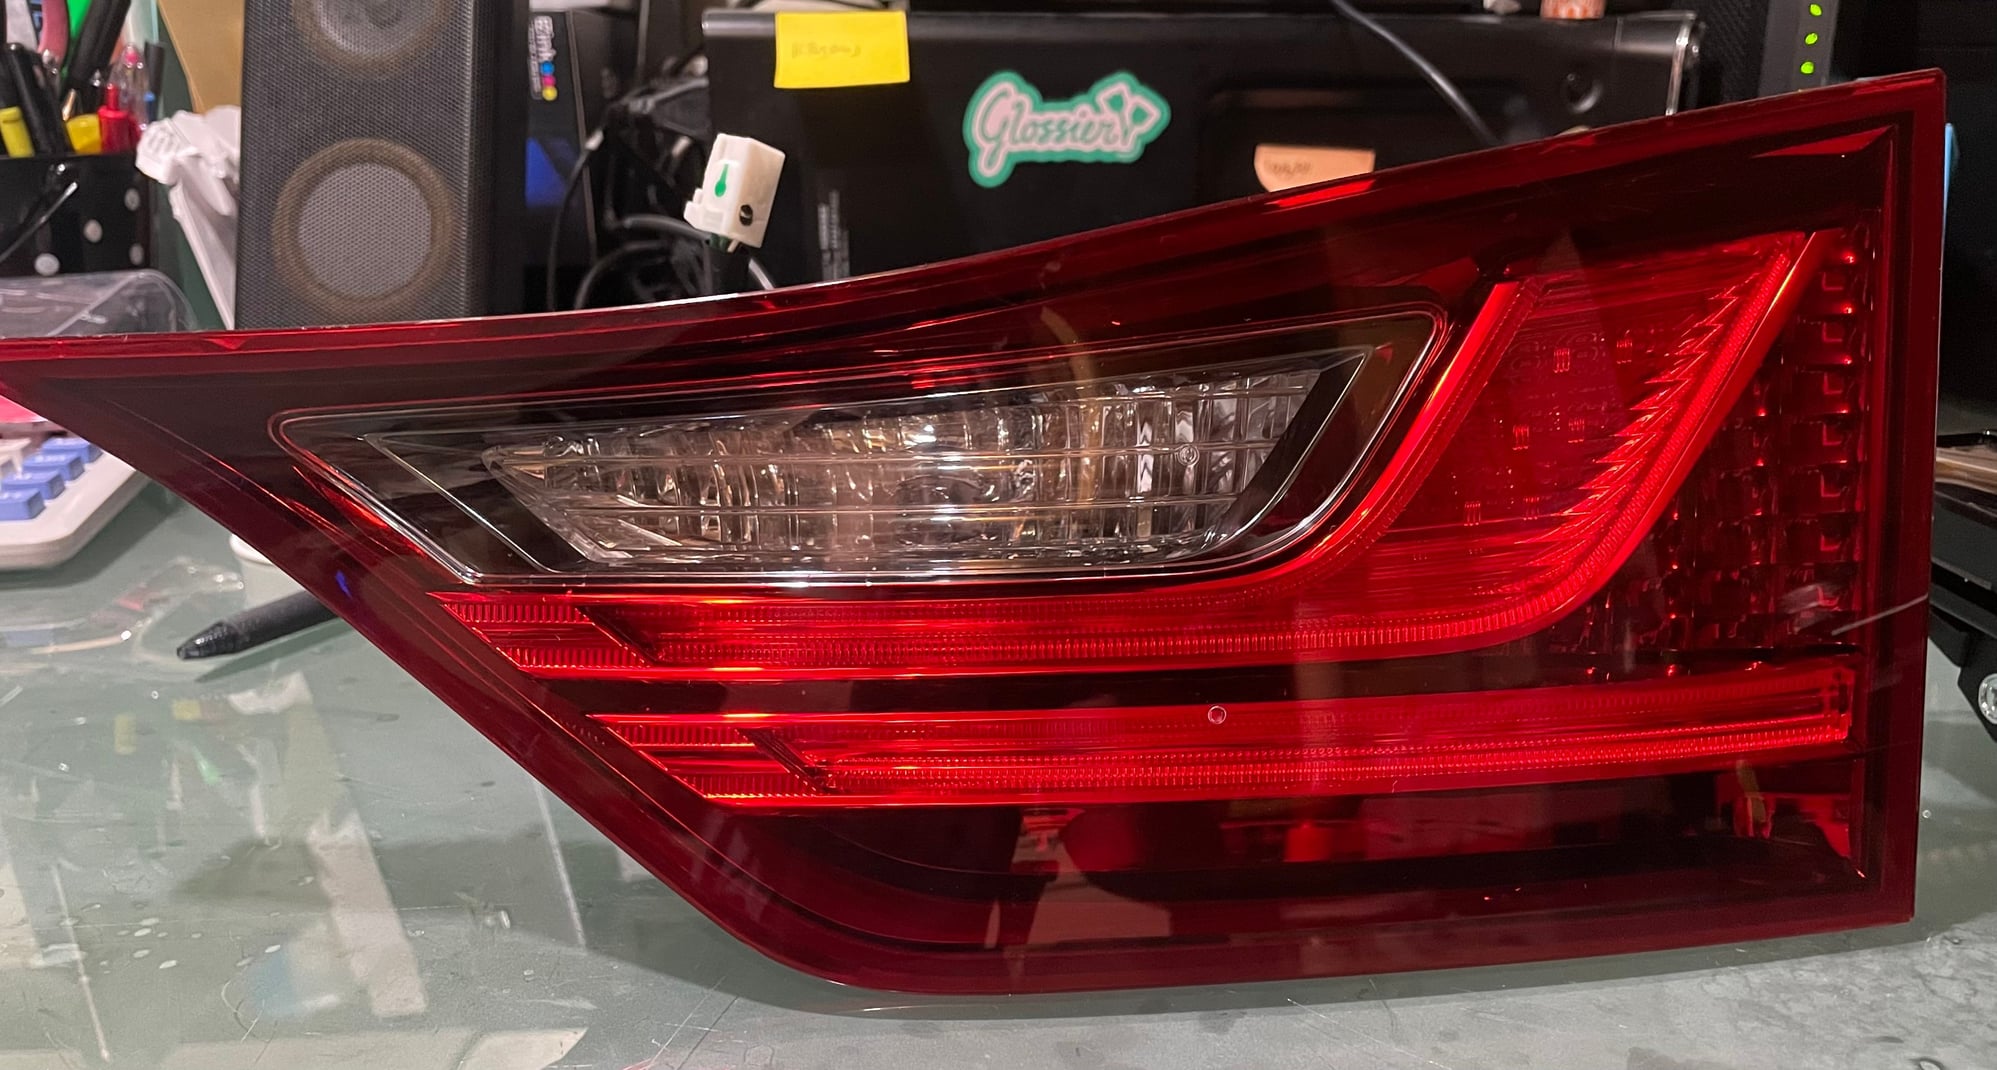 Miscellaneous - SoCal 2015 inner tail lights and shift cluster - Used - 2013 to 2015 Lexus GS350 - Alhambra, CA 91801, United States